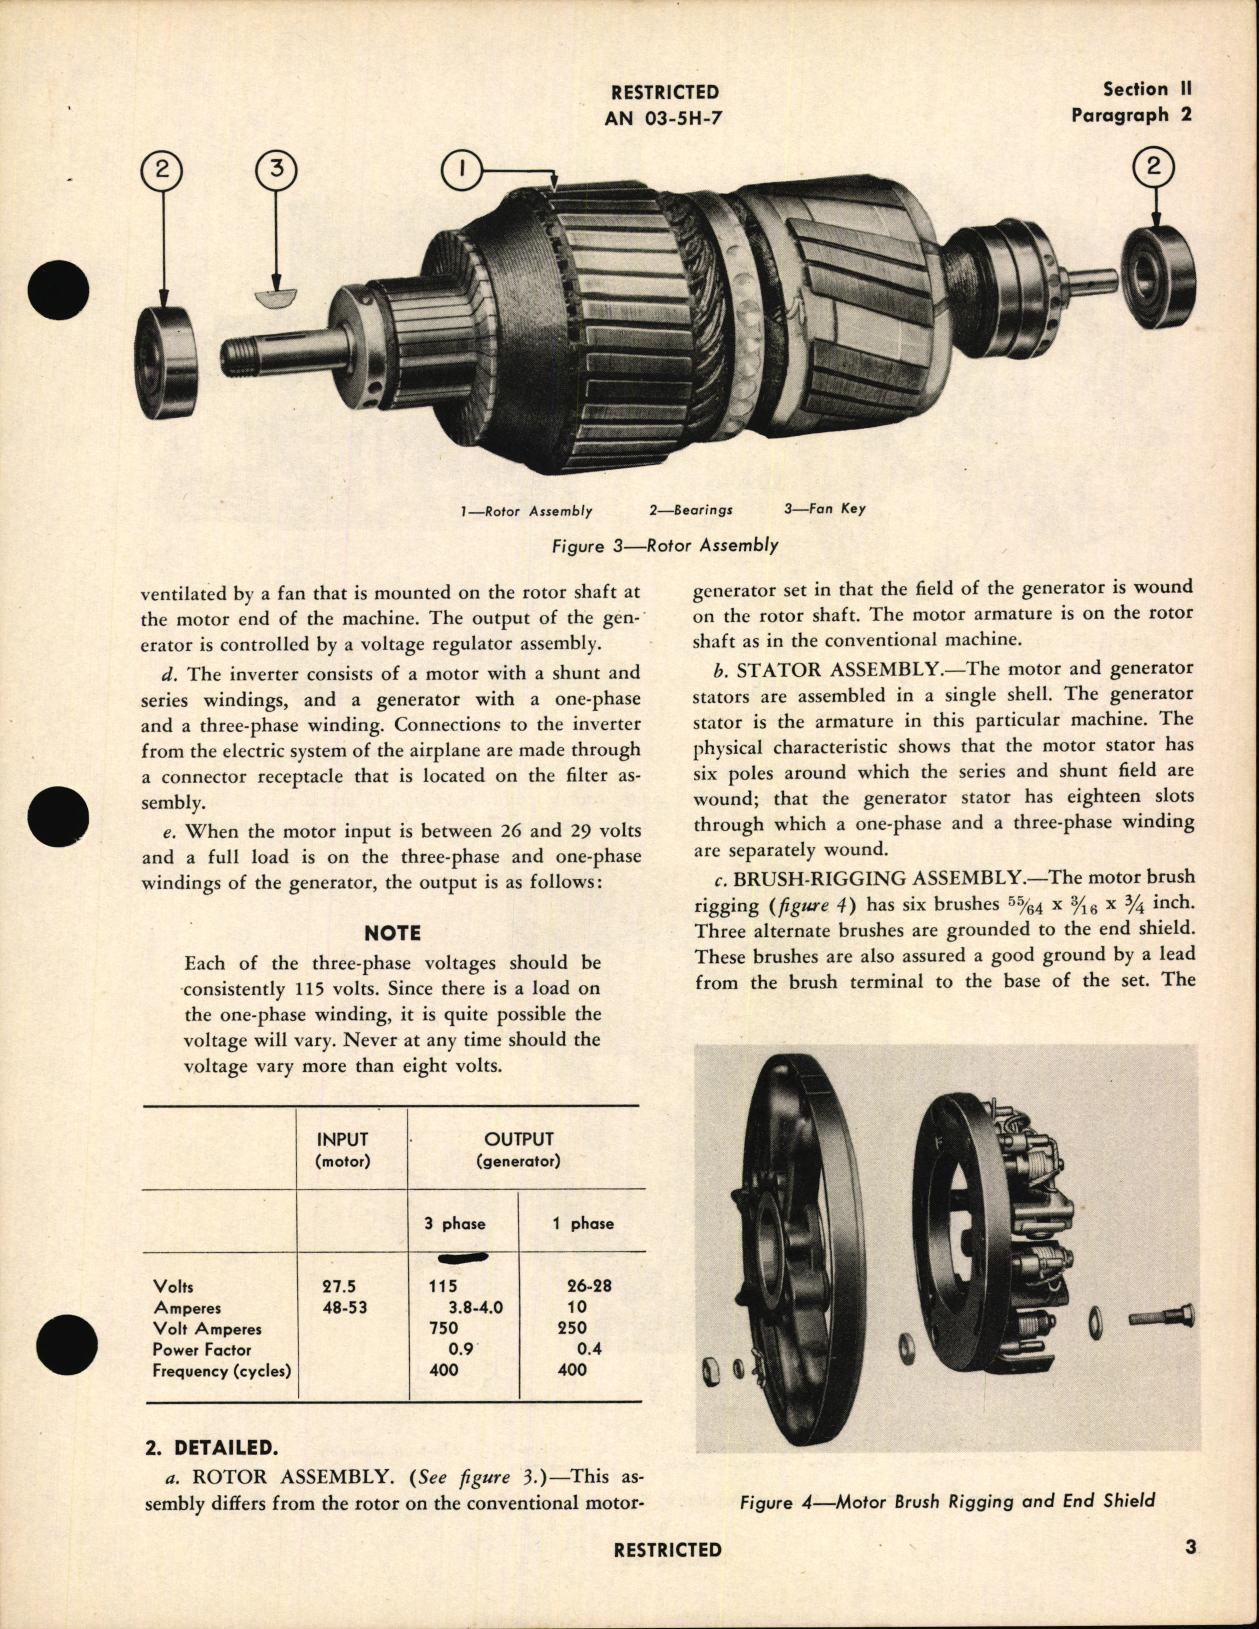 Sample page 7 from AirCorps Library document: Handbook of Instructions with Parts Catalog for Model 5AT121JJ2B Inverter